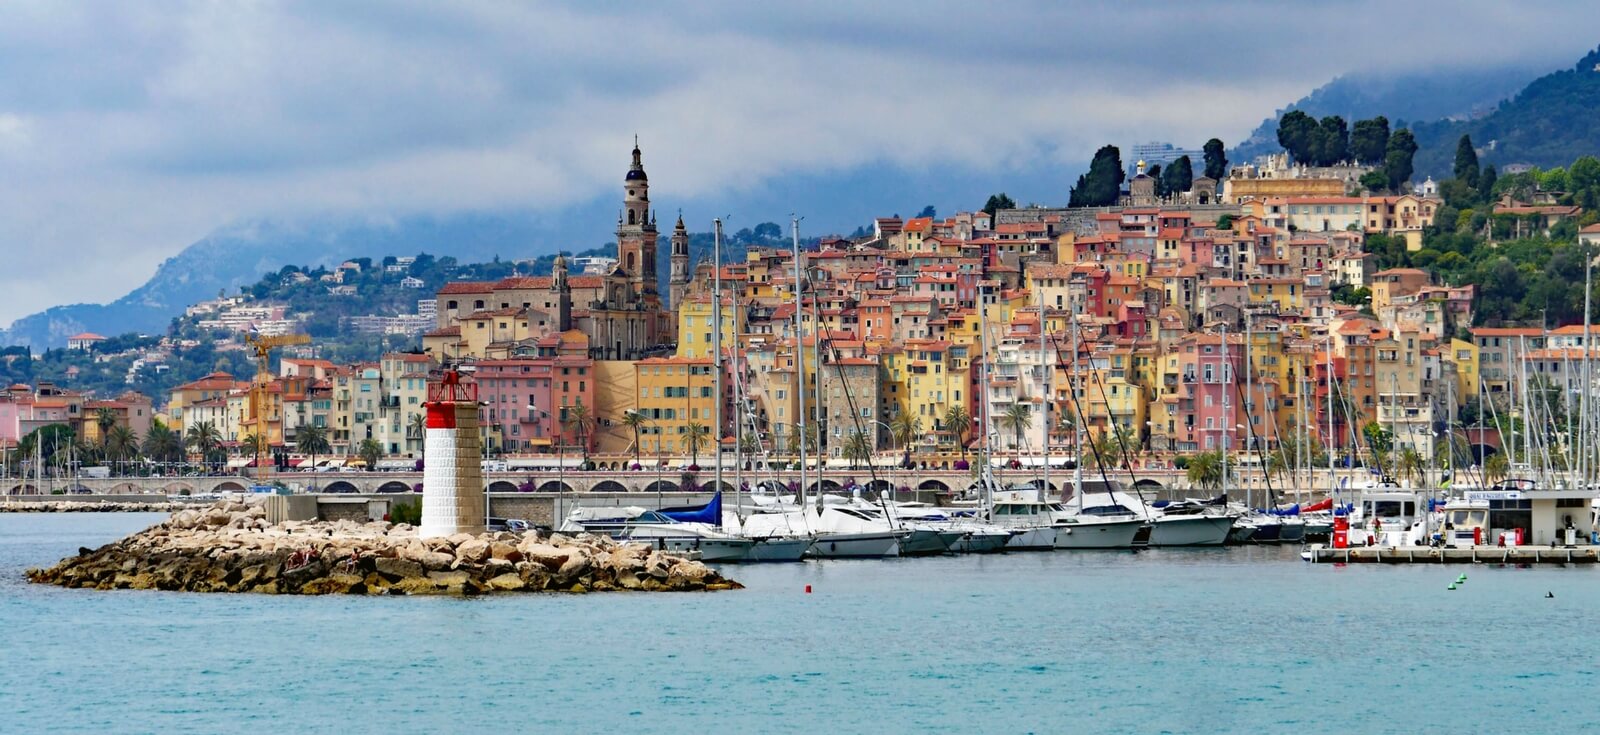 view of the port of Menton, France